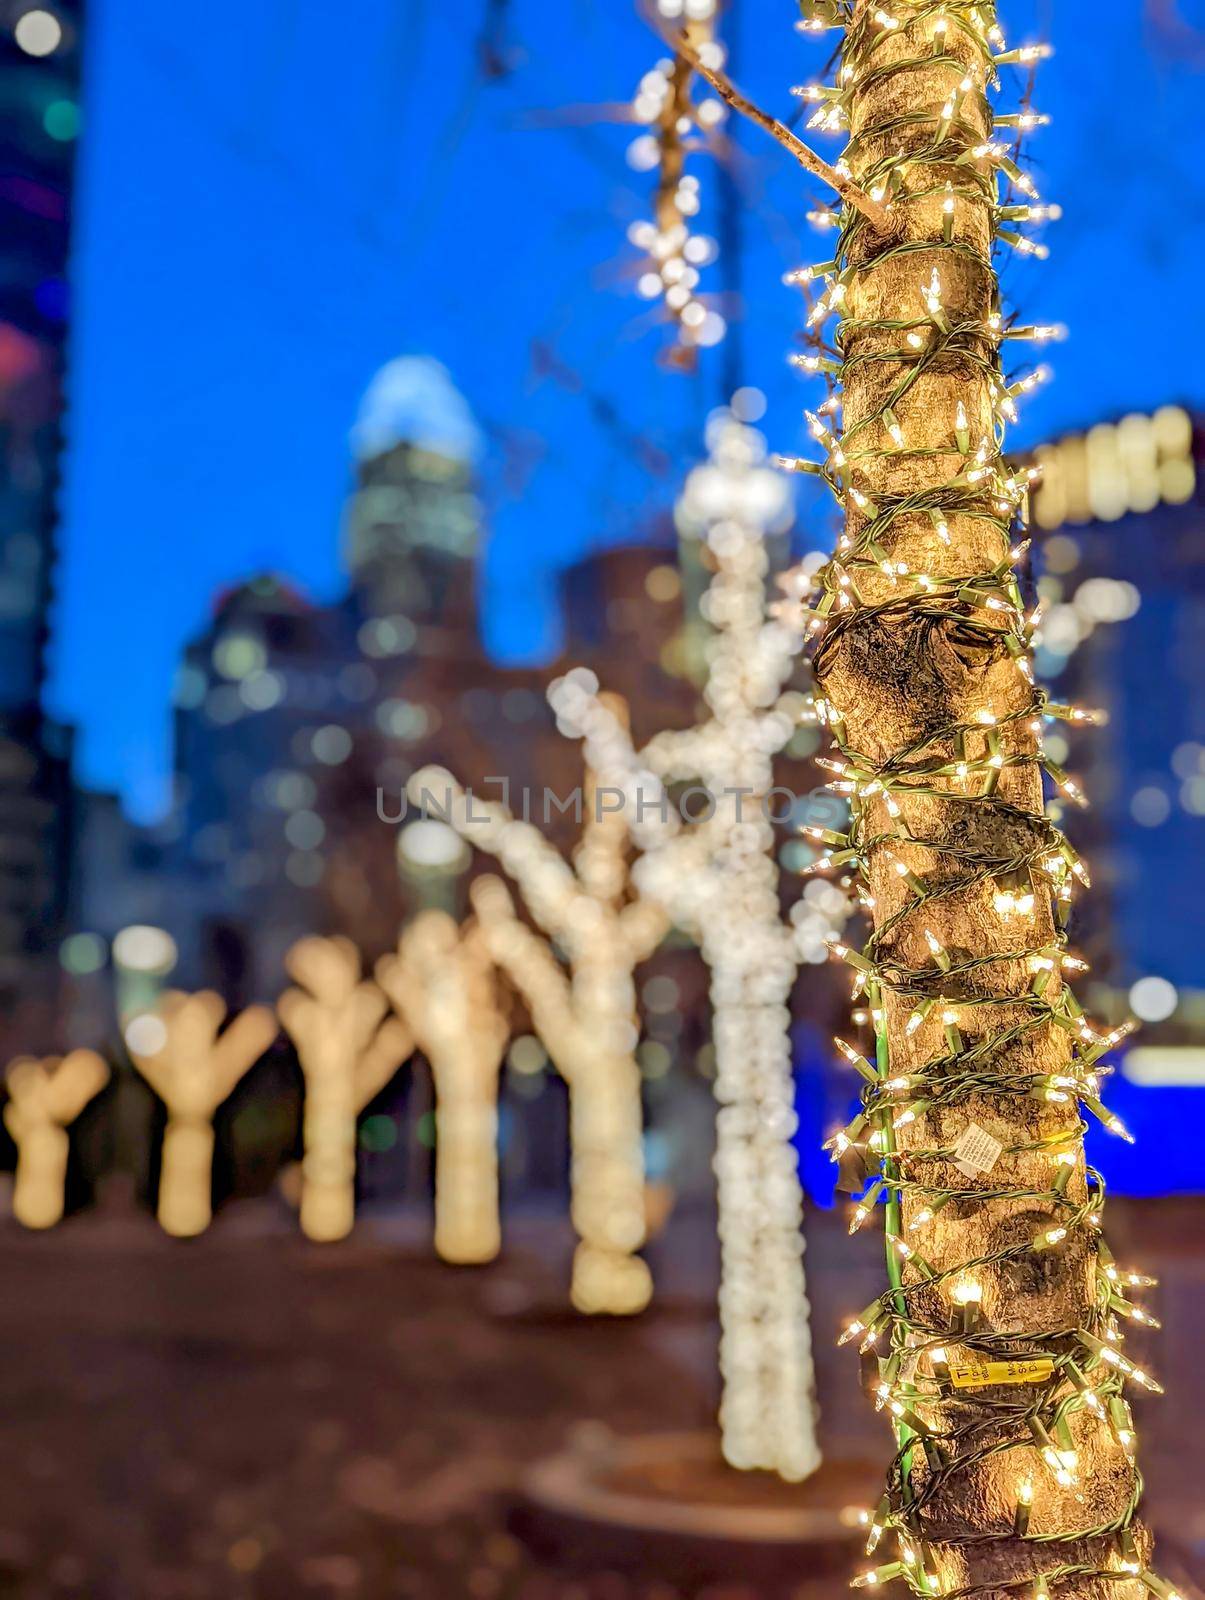 charlotte nc early morning decorated with holiday lights by digidreamgrafix